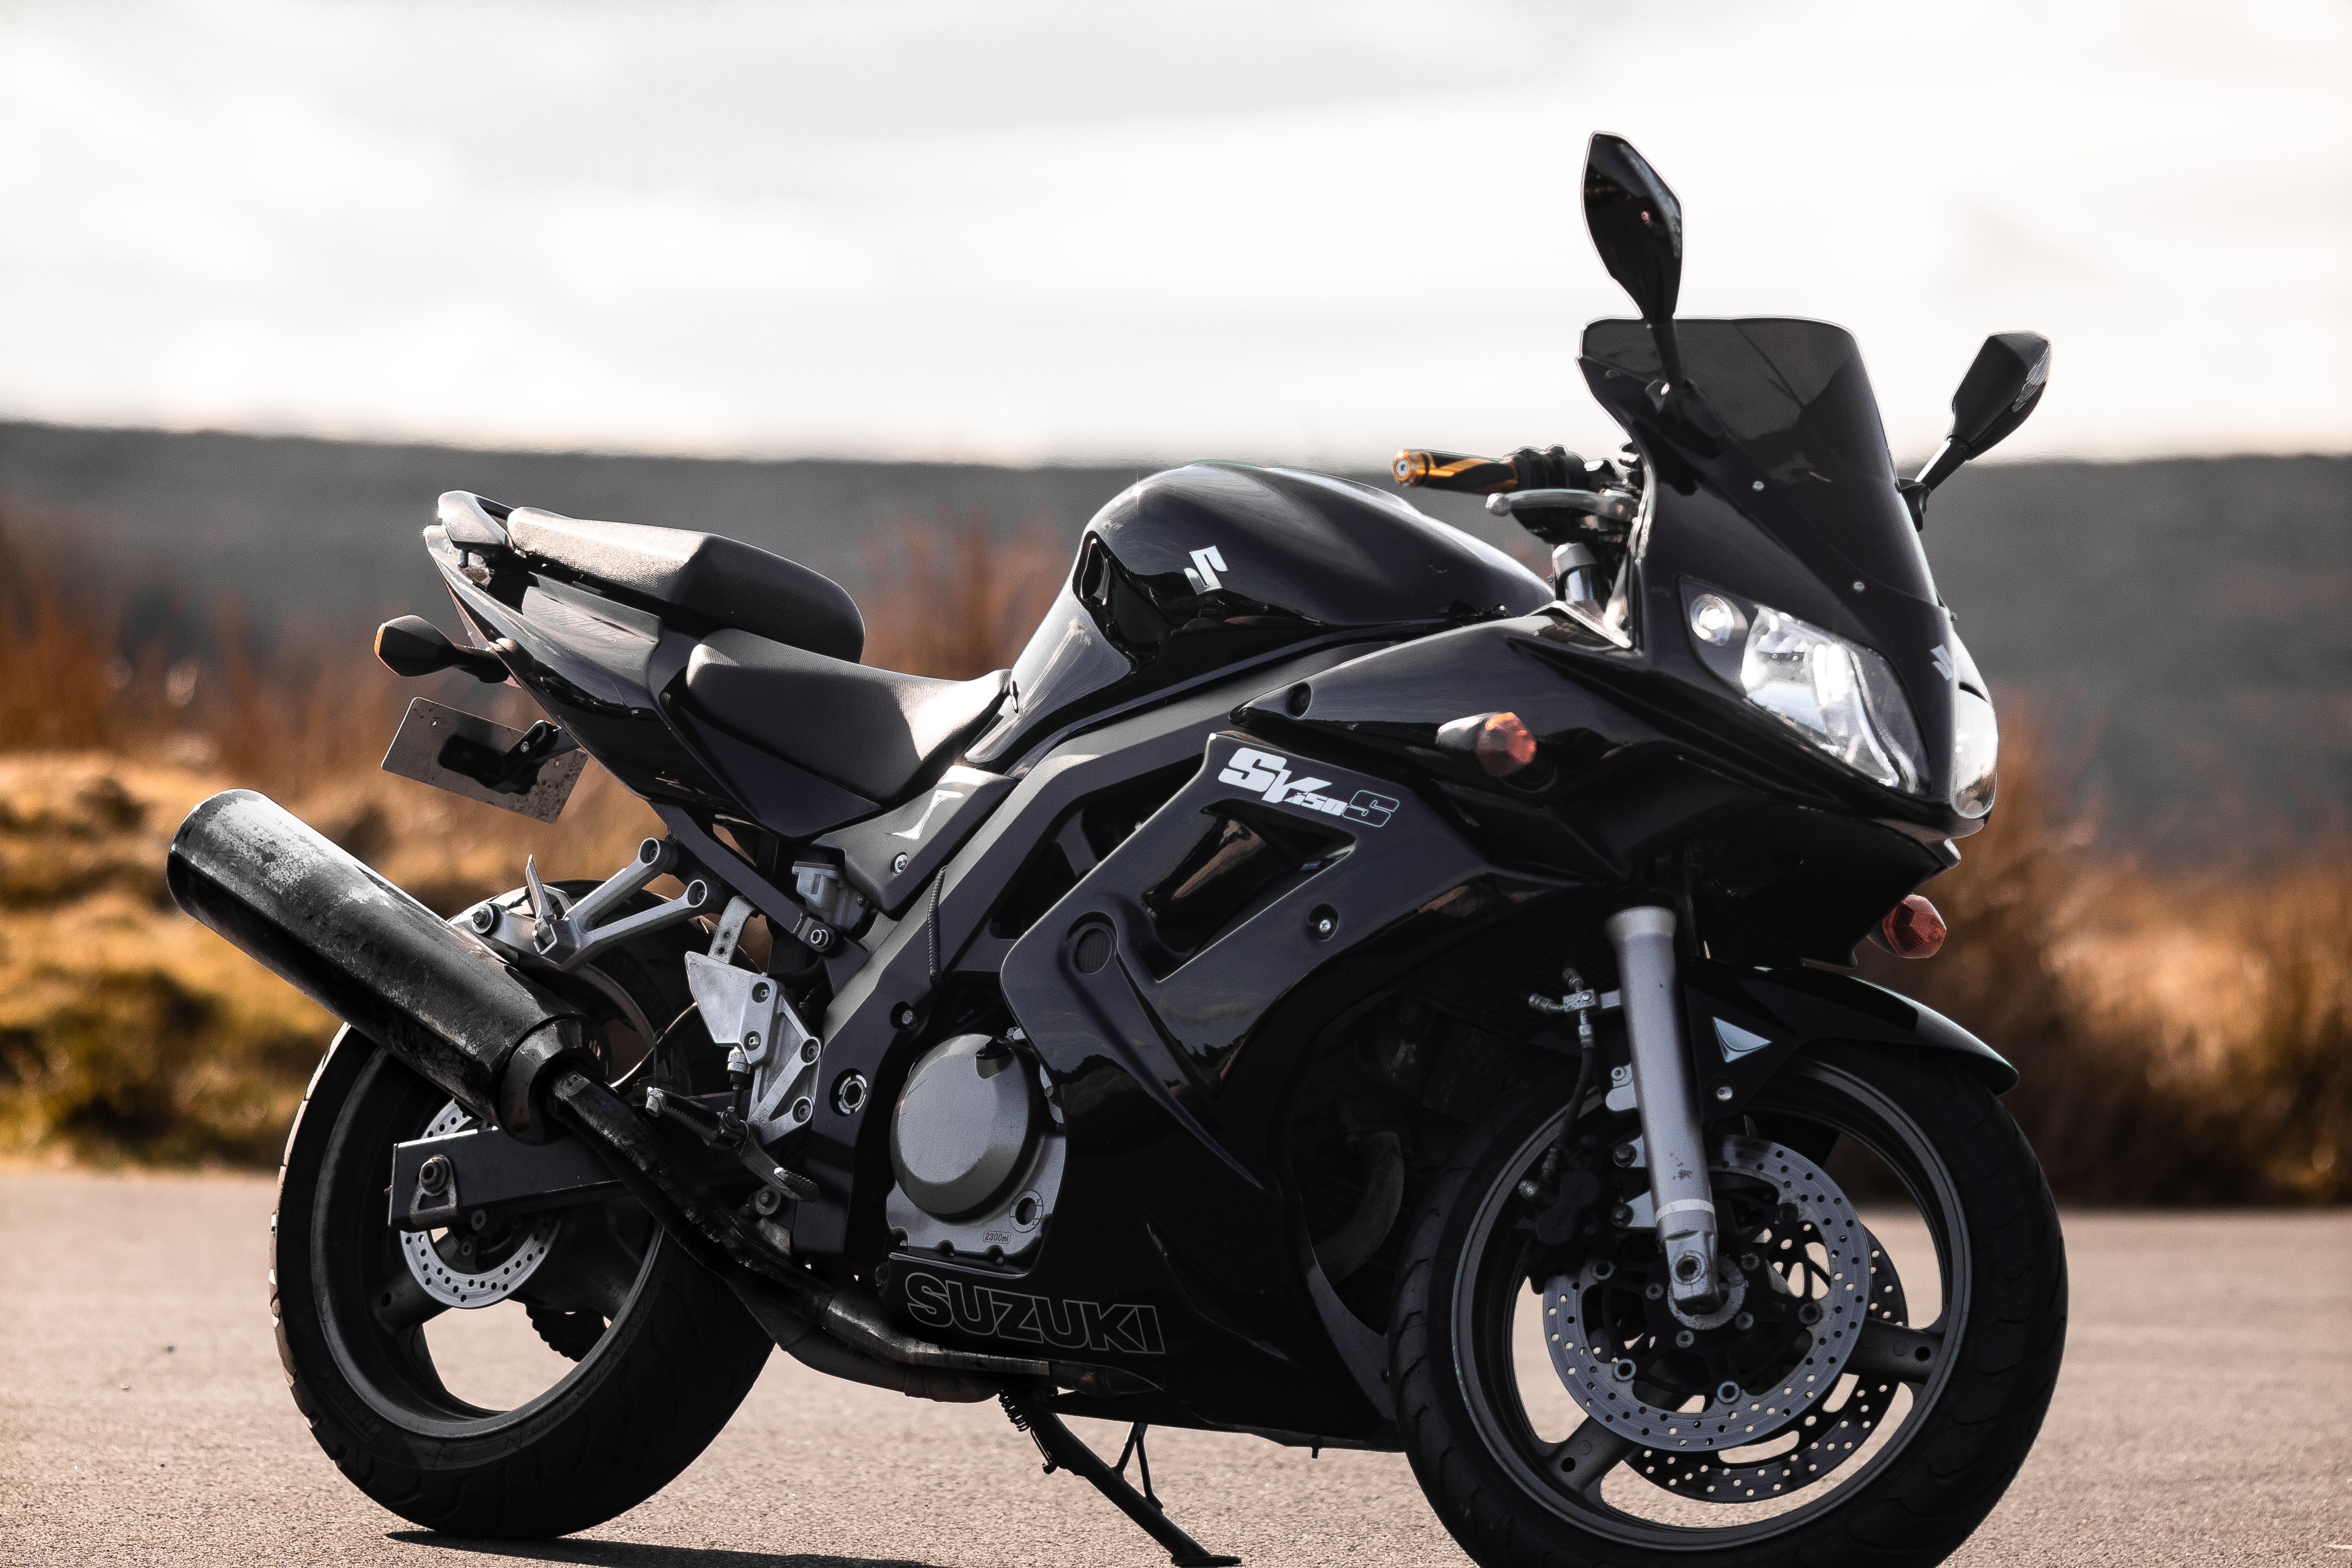 Where to Buy Suzuki Motorcycles in Winchester